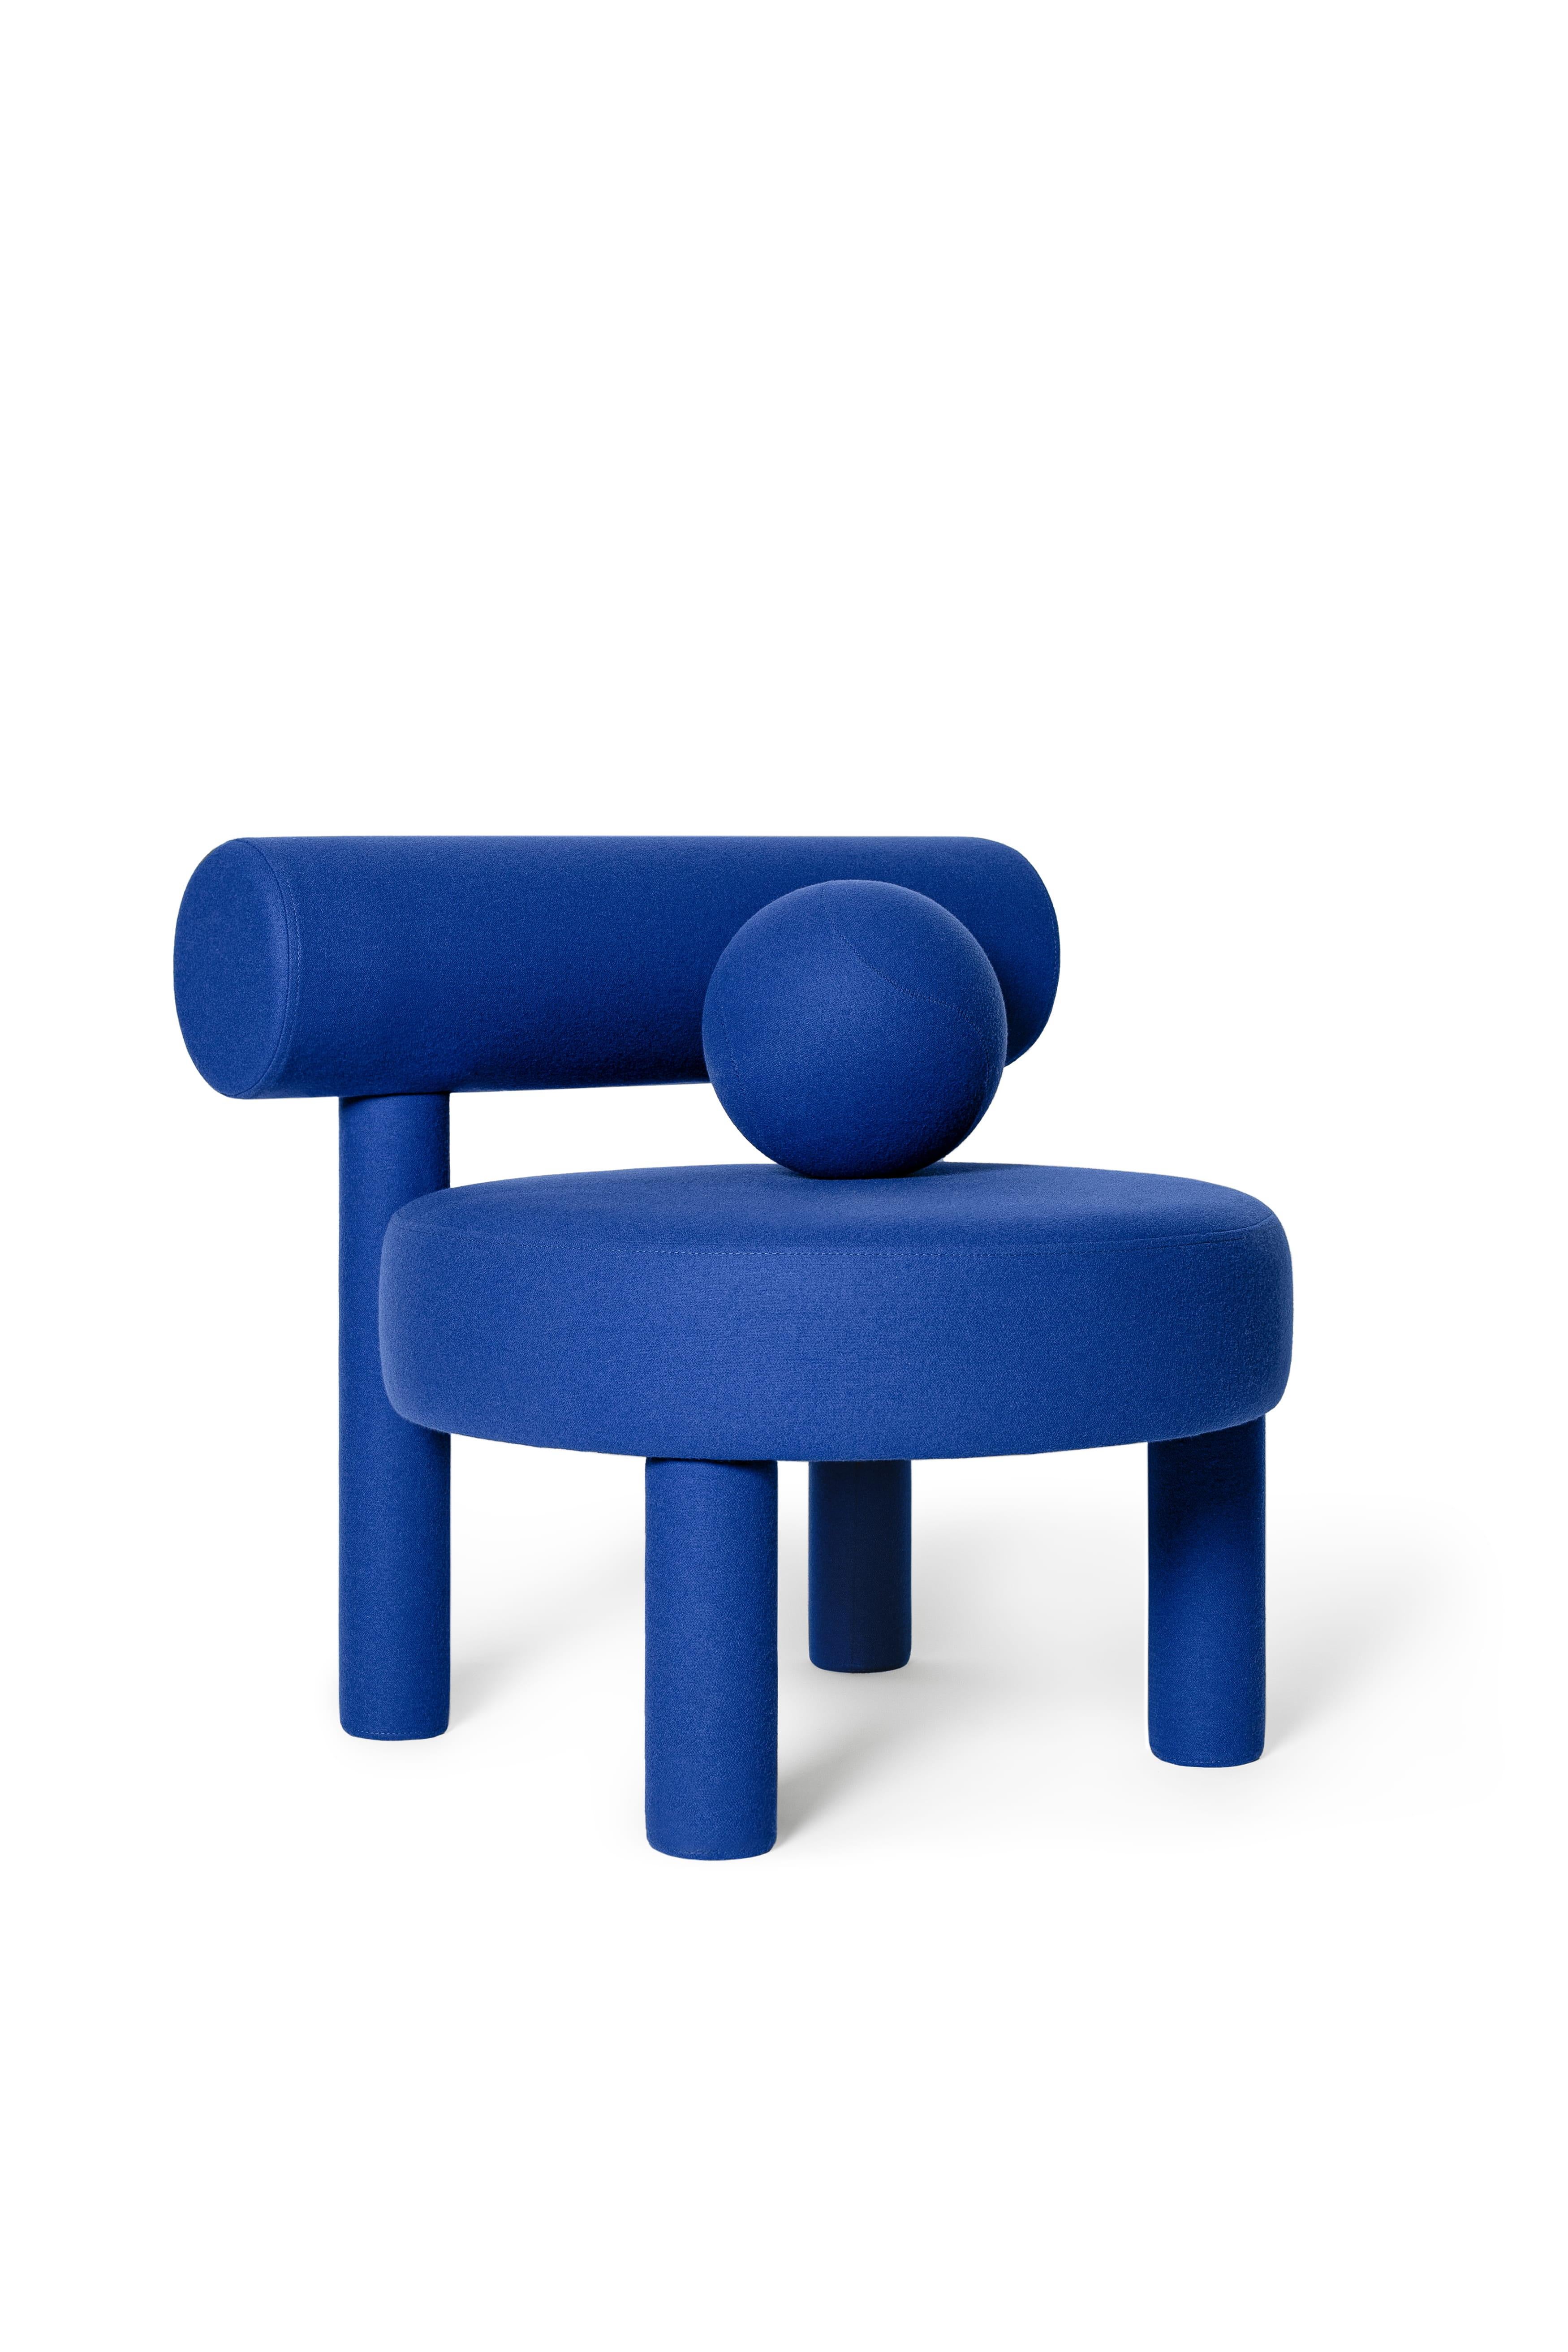 Contemporary Low Chair 'Gropius CS1' by NOOM, Blue For Sale 2